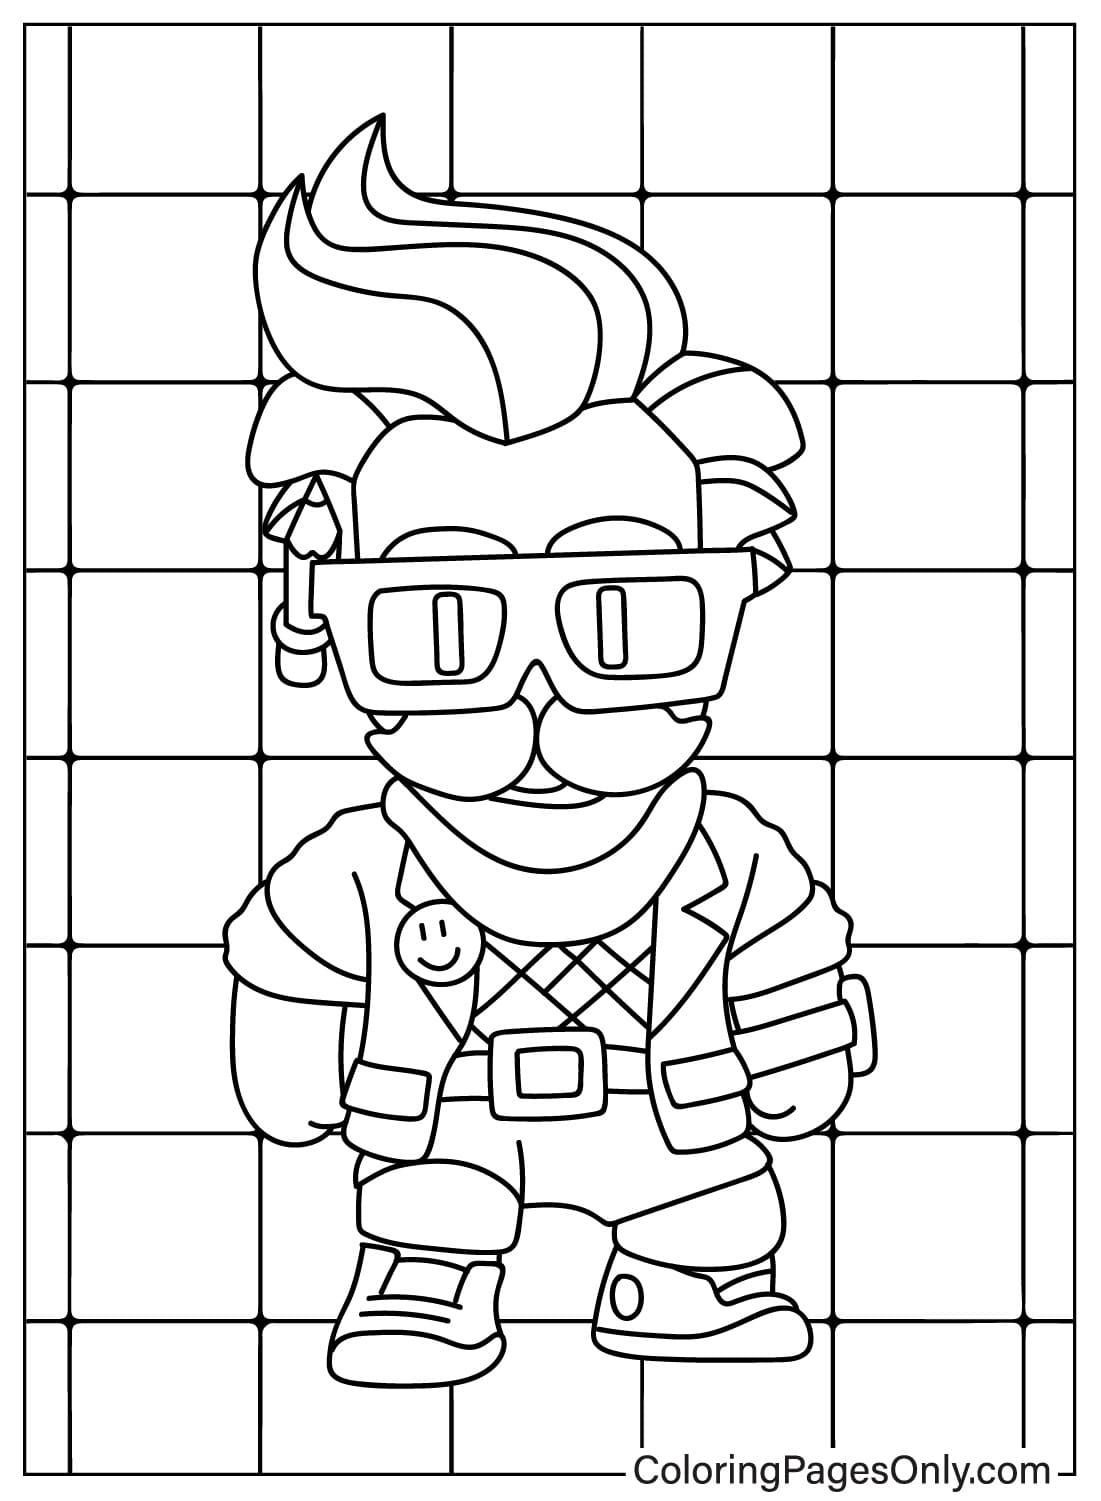 Stumble Guys Coloring Page from Stumble Guys